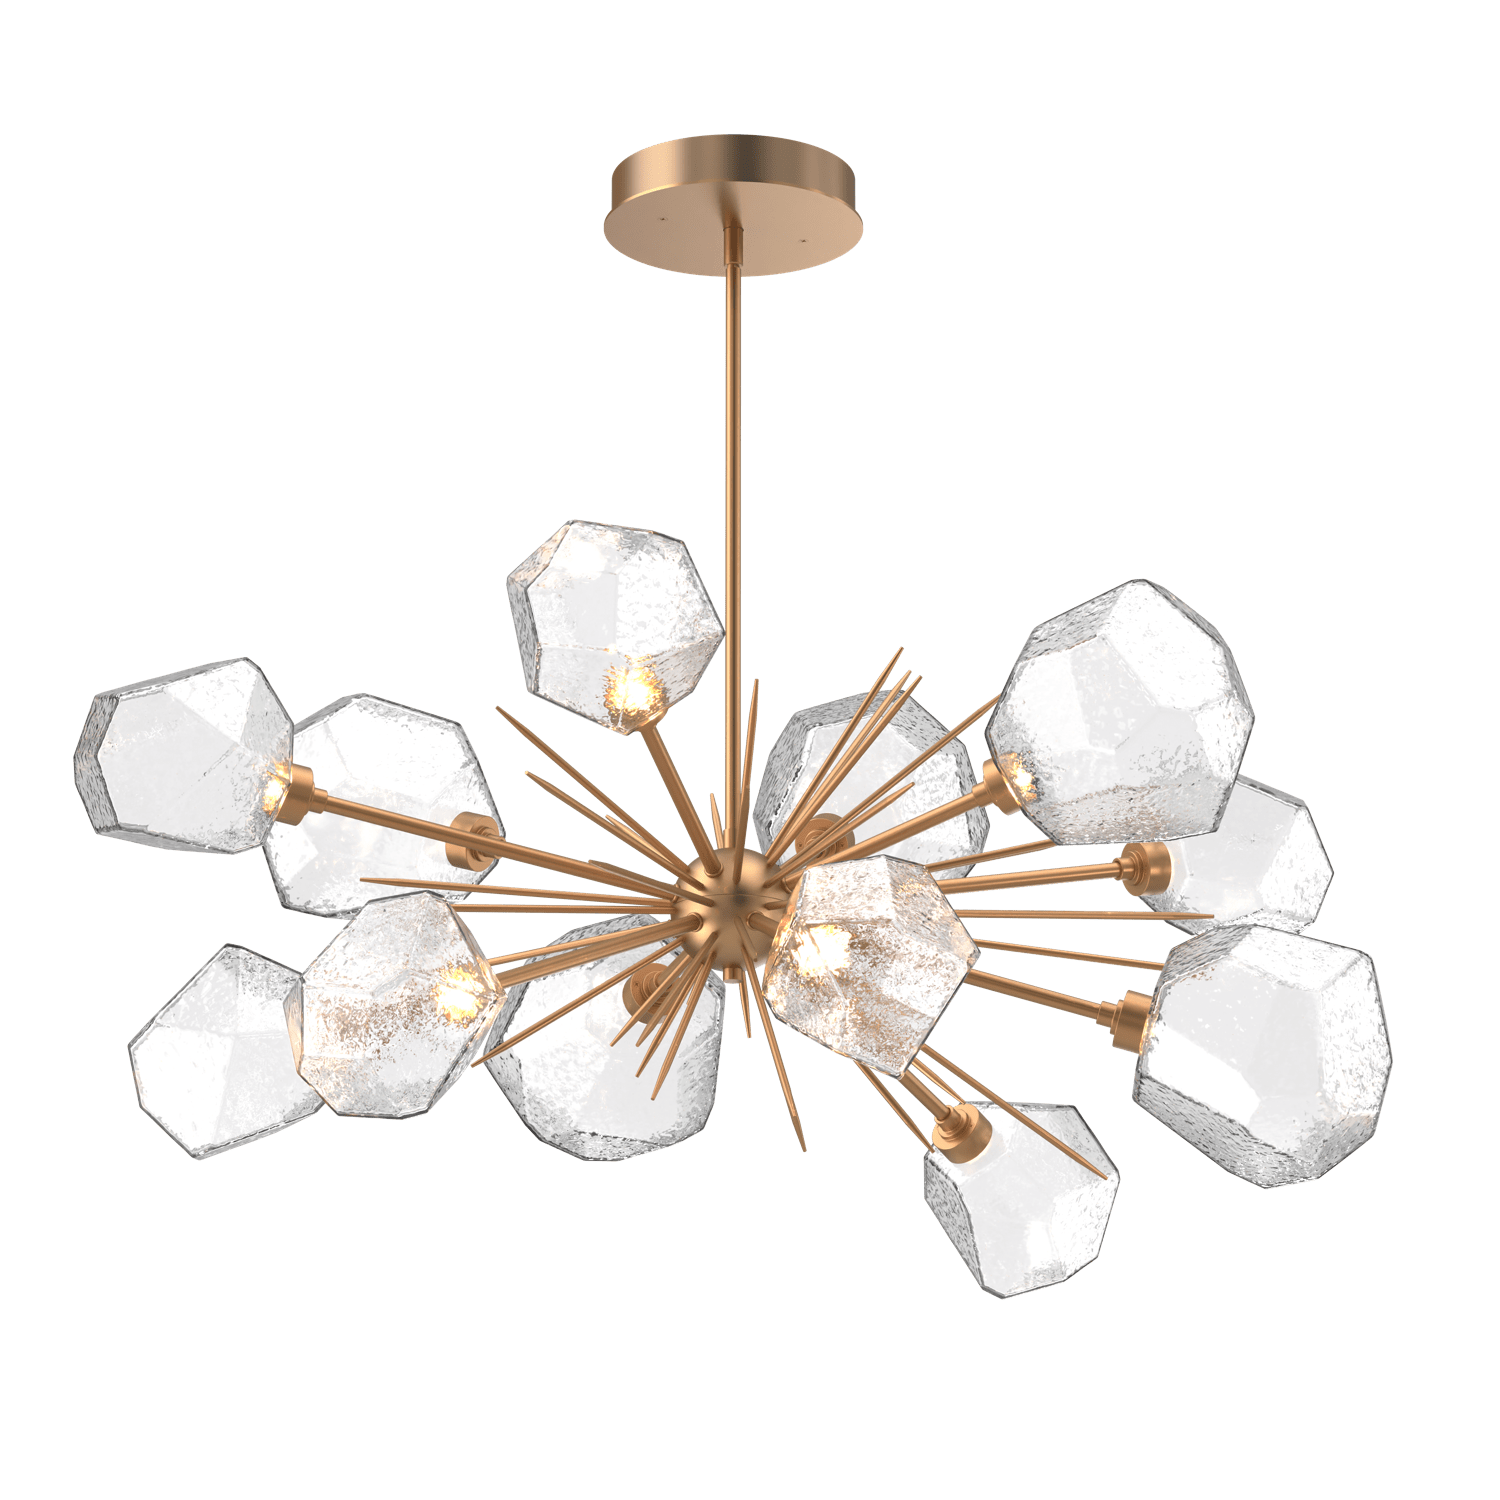 PLB0039-0D-NB-C-Hammerton-Studio-Gem-43-inch-oval-starburst-chandelier-with-novel-brass-finish-and-clear-blown-glass-shades-and-LED-lamping